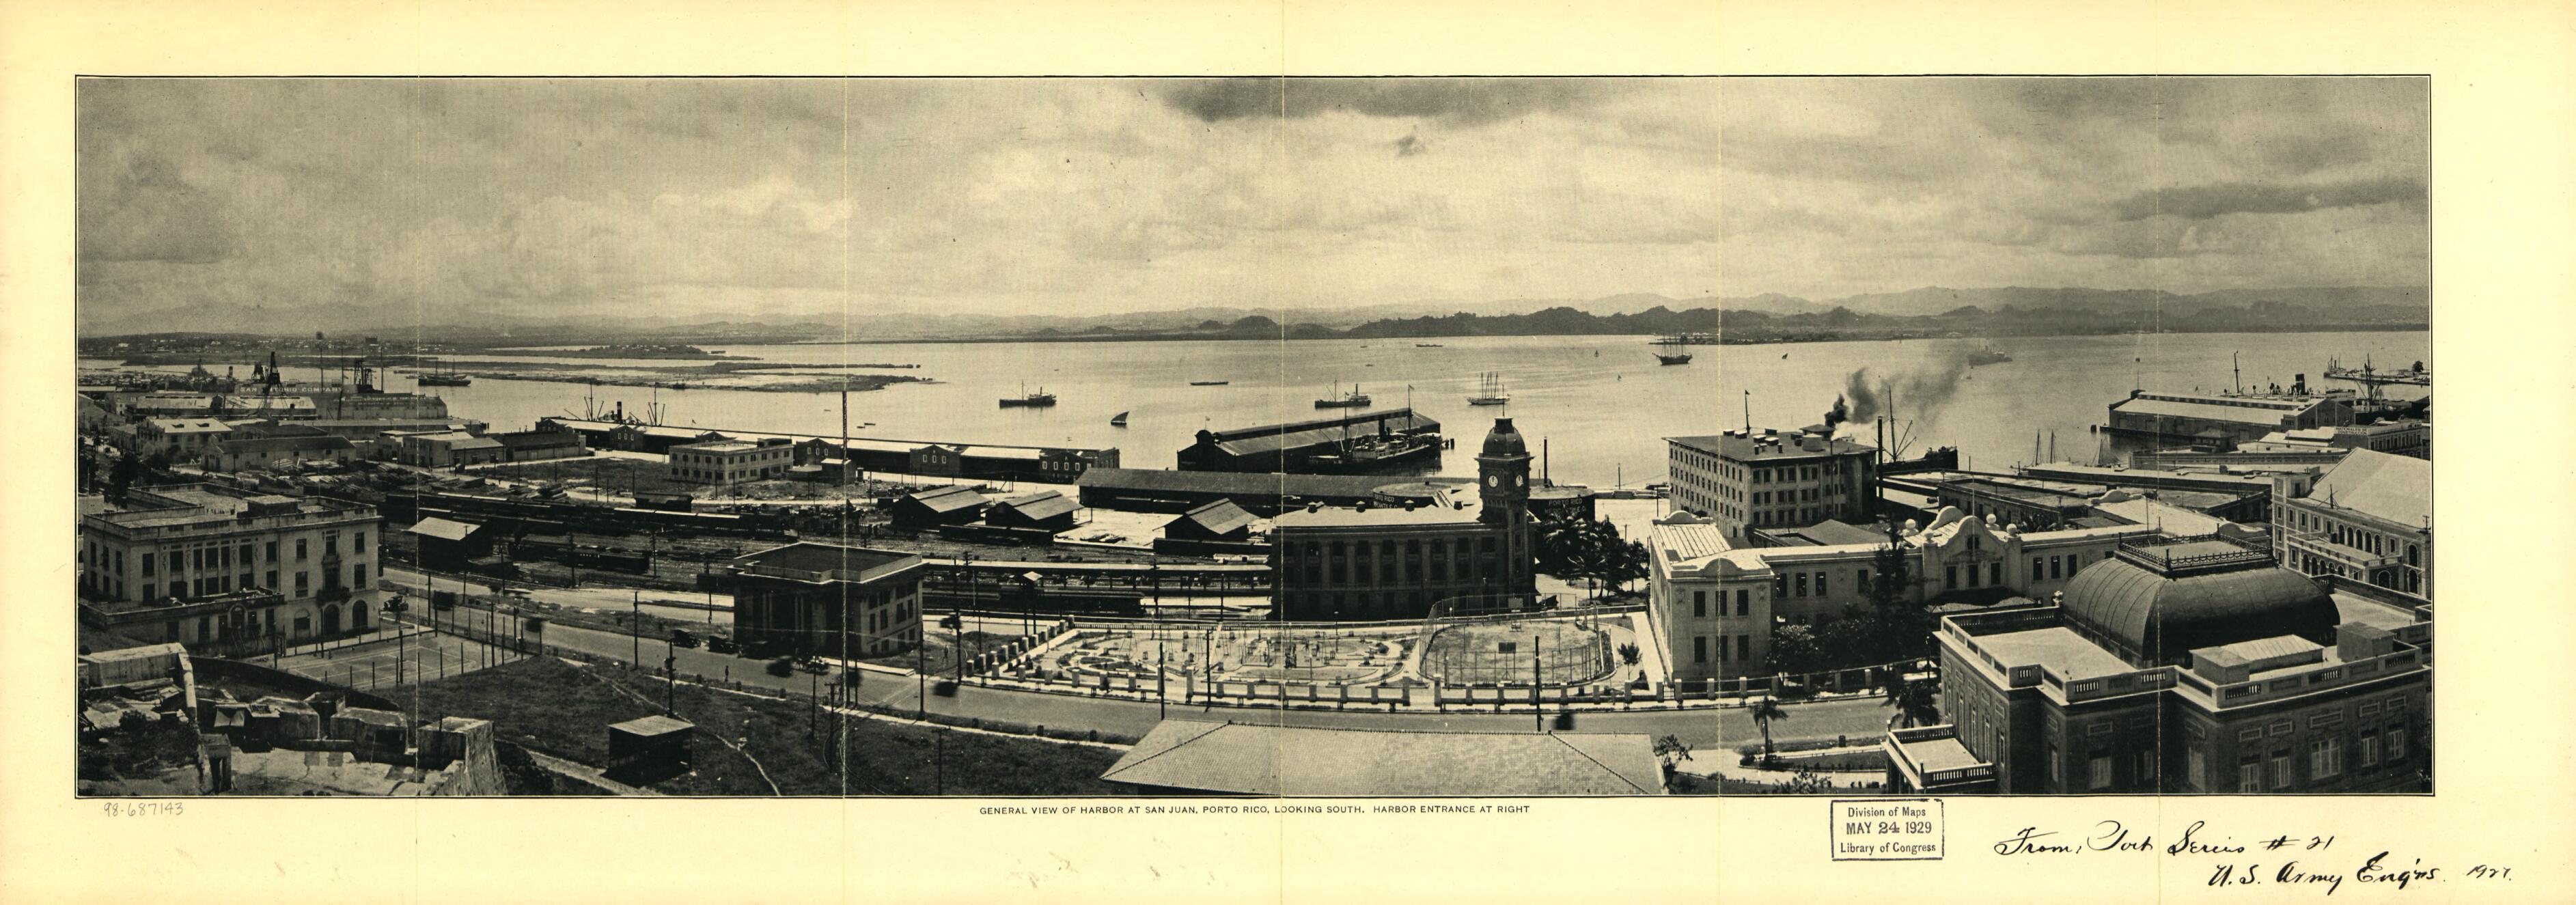 This old map of General View of Harbor at San Juan, Porto Rico Looking South from 1927 was created by  United States. Army. Corps of Engineers in 1927